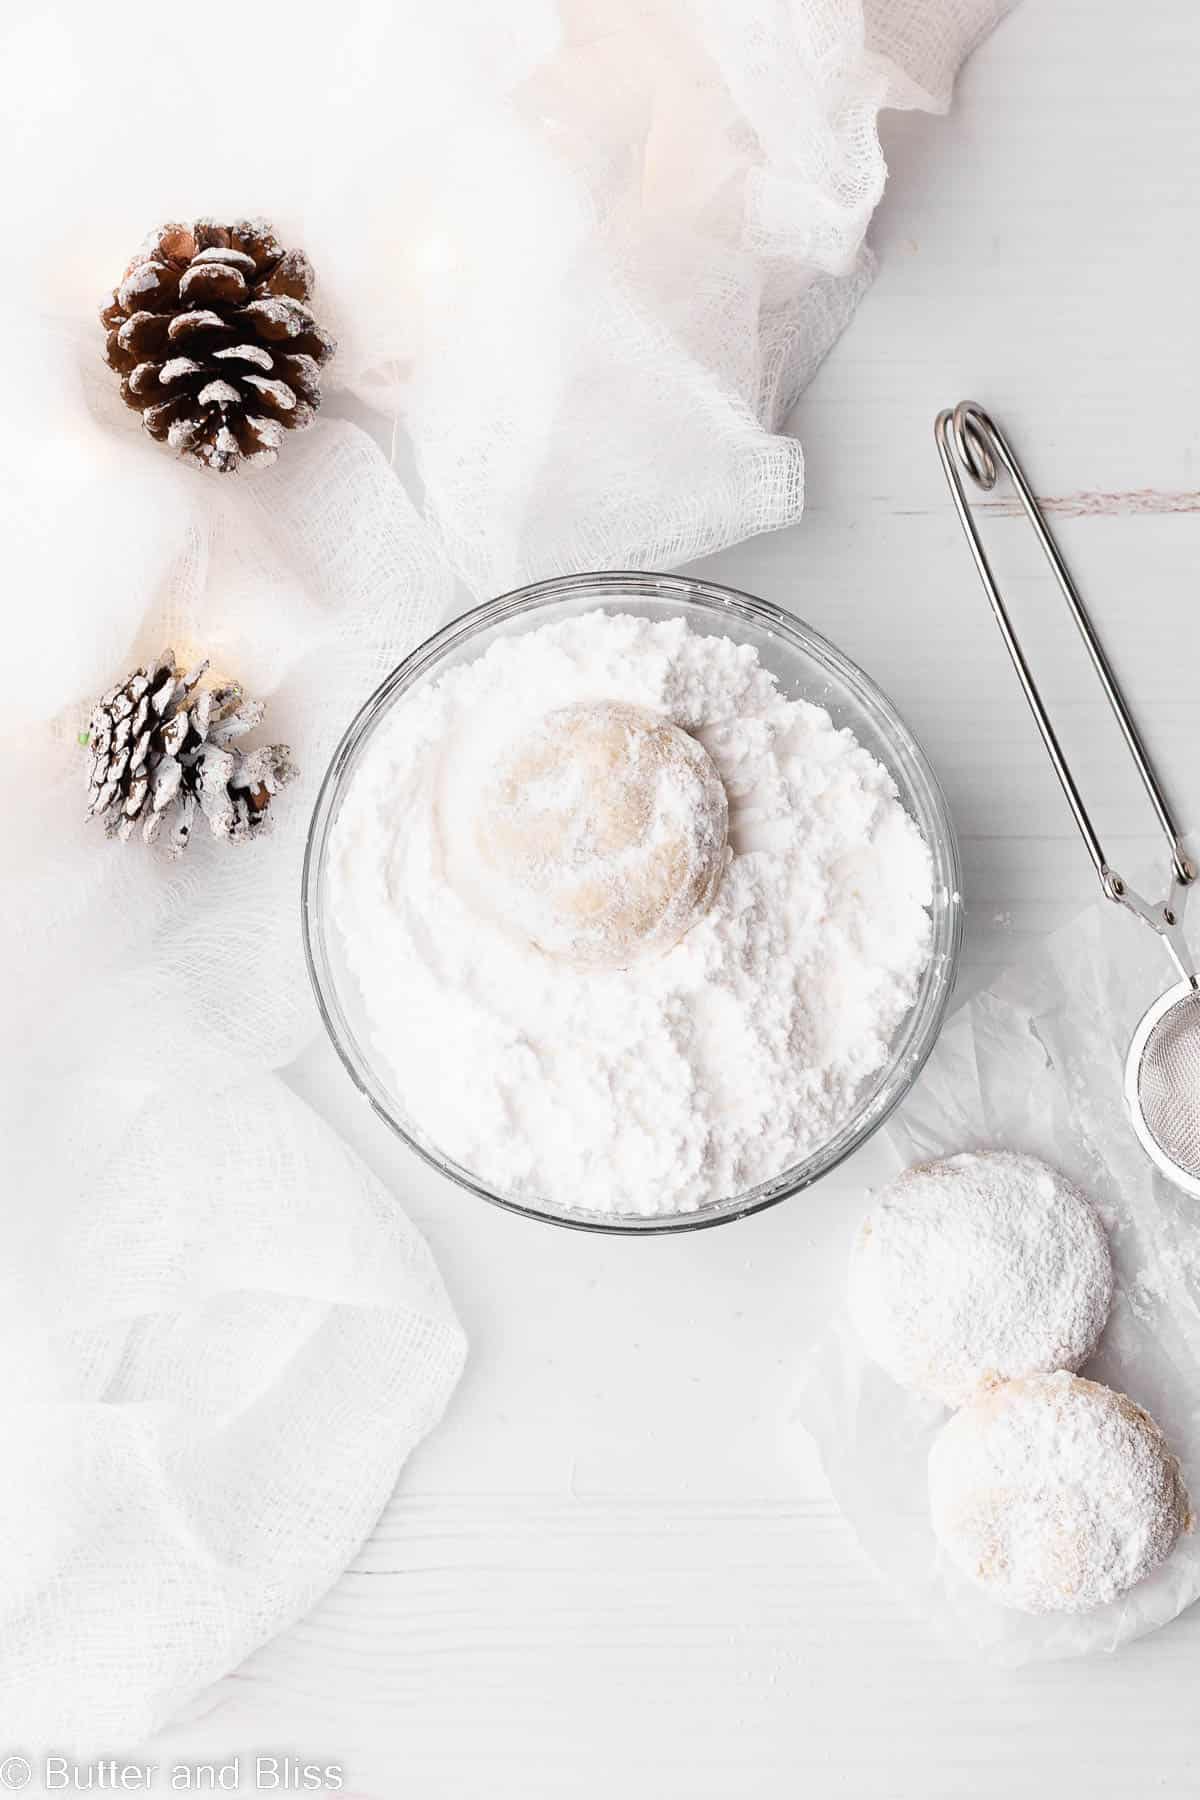 A Christmas cookie being rolled through a bowl of powdered sugar on a white table.